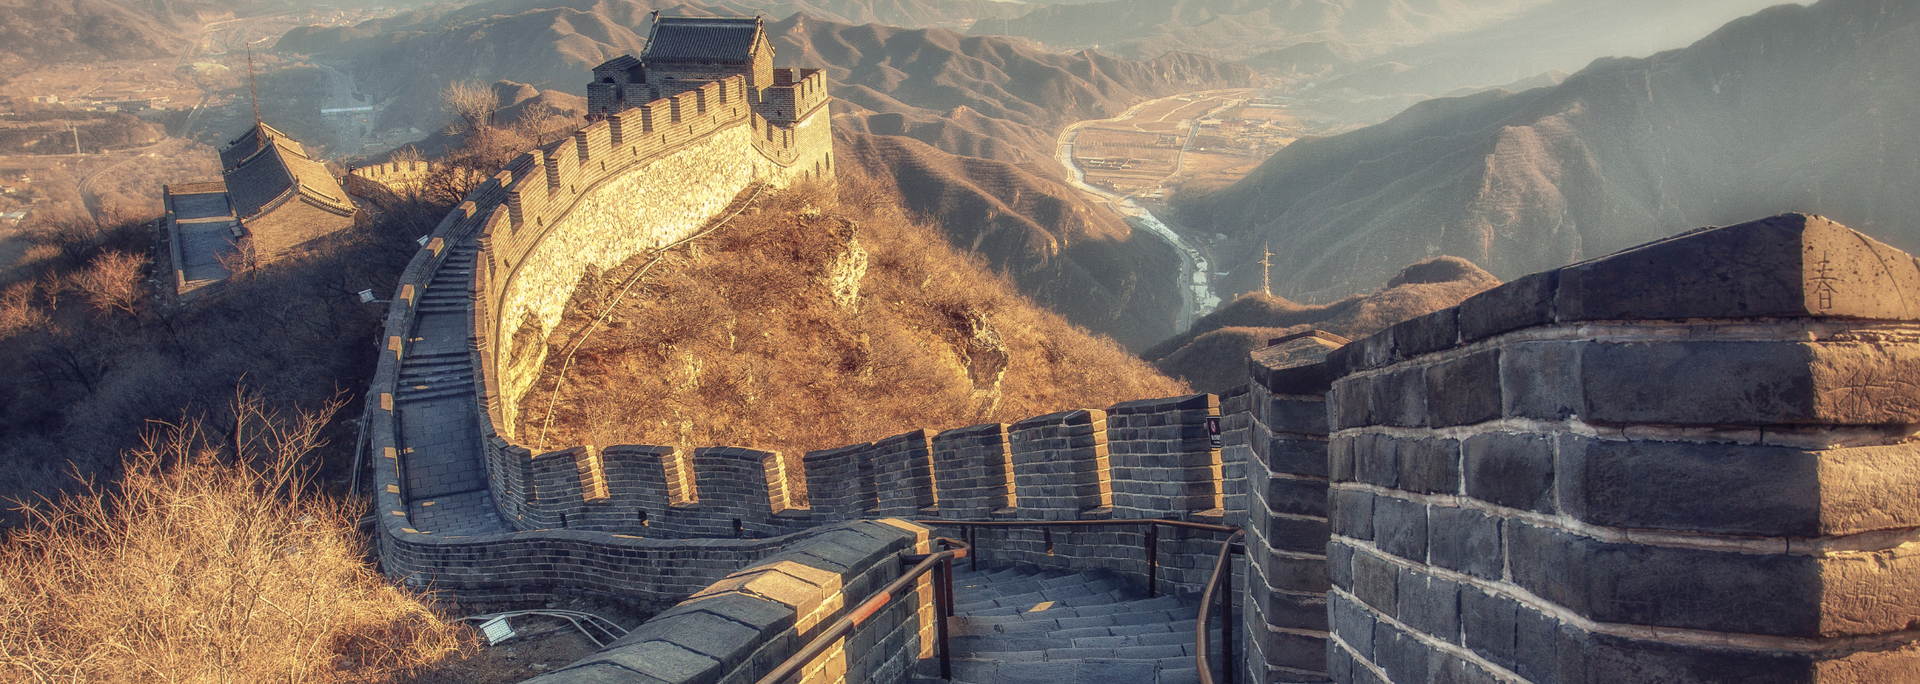 Picture of the Great Wall Of China